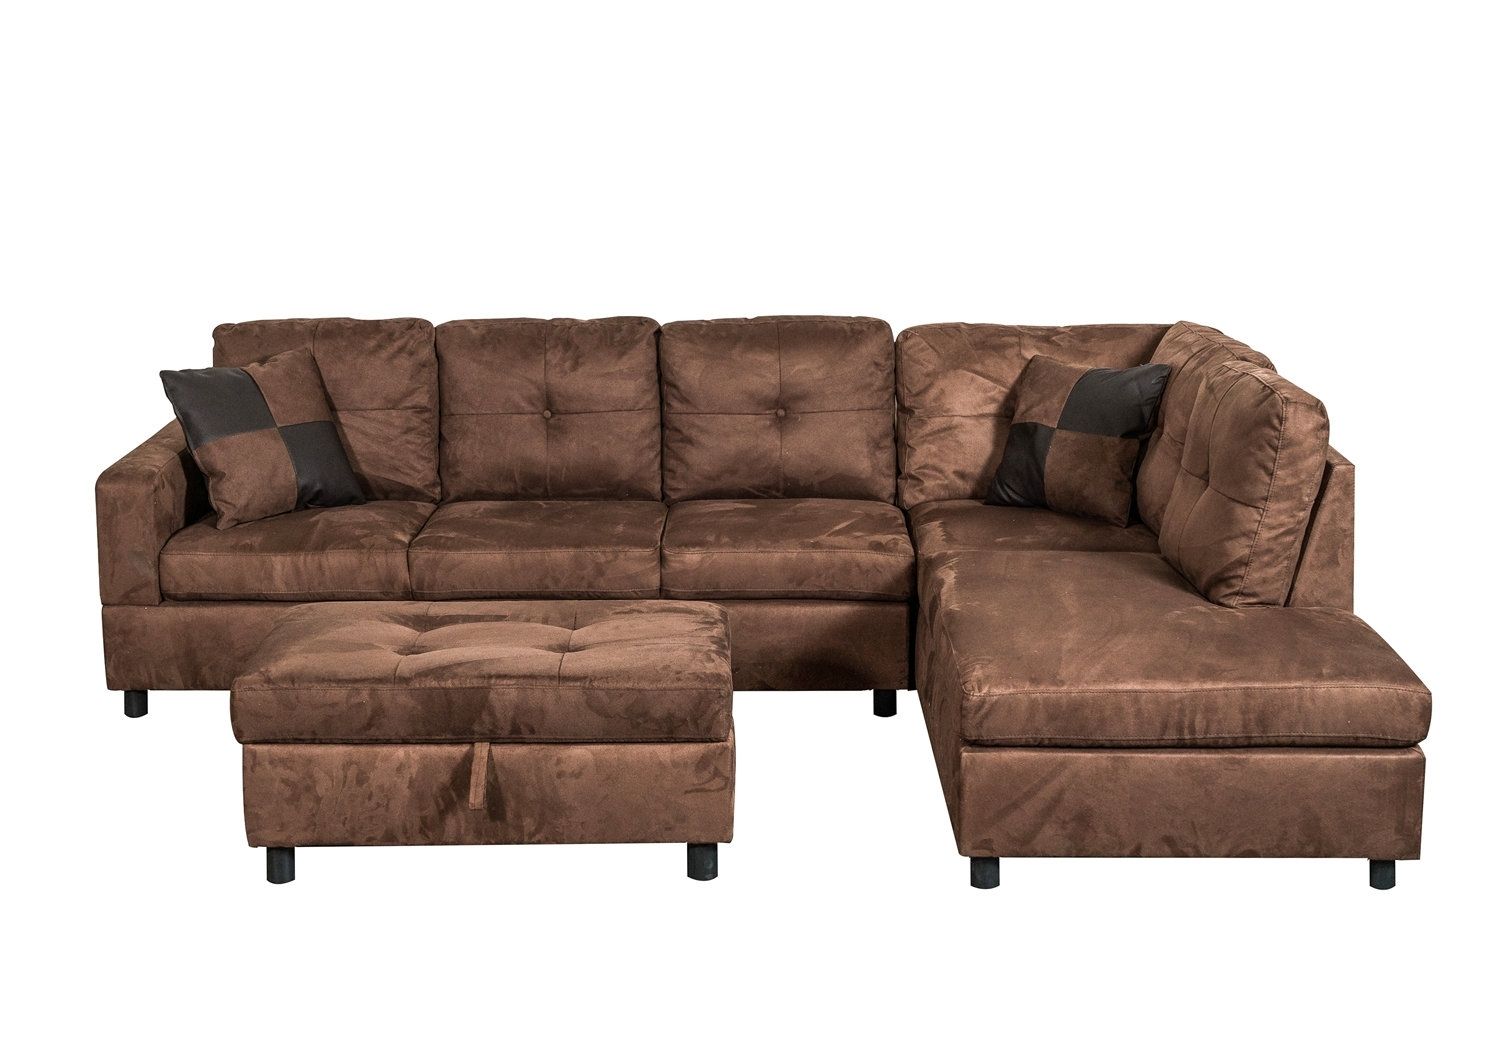 Charlton Home Richview Reversible Sectional Sofa With Ottoman | Wayfair In Collins Sofa Sectionals With Reversible Chaise (Photo 2 of 25)